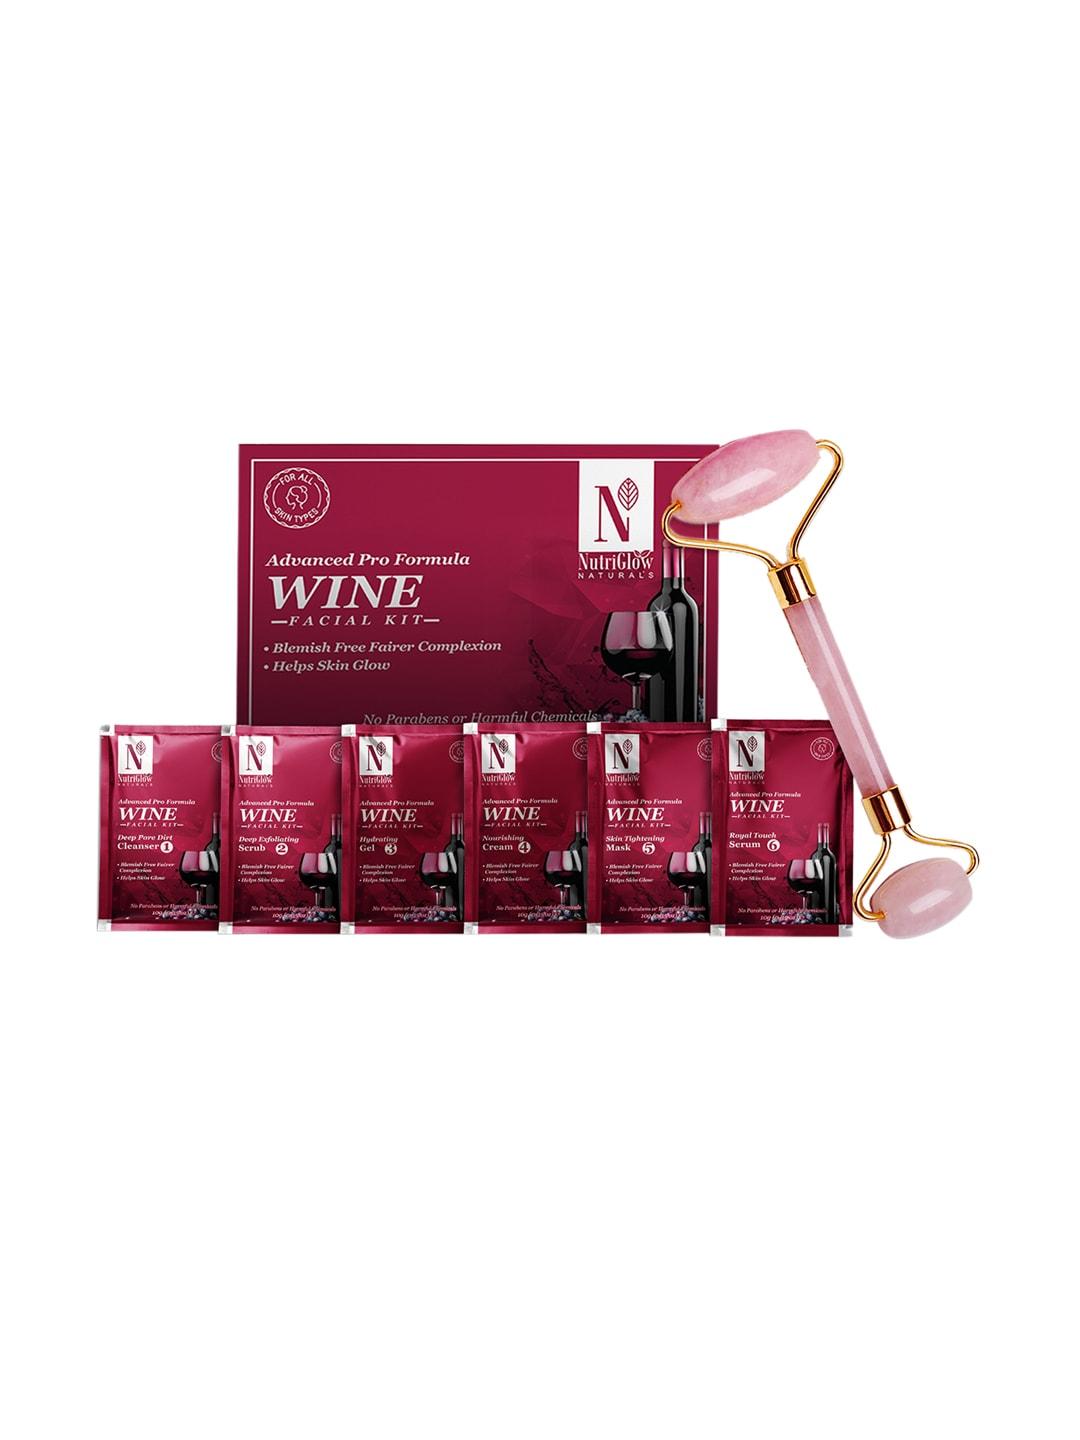 nutriglow-naturals-sustainable-wine-facial-kit-for-blemish-free-complexion-60-g-with-jade-roller